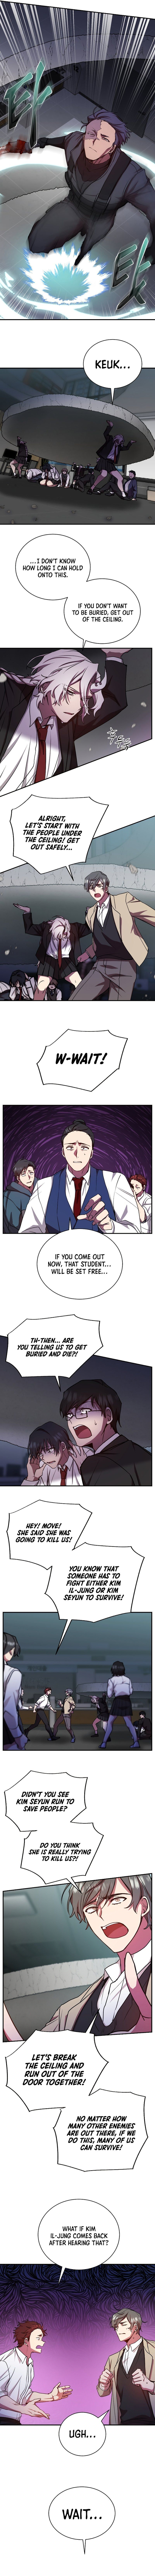 My School Life Pretending To Be a Worthless Person - Chapter 21 Page 6